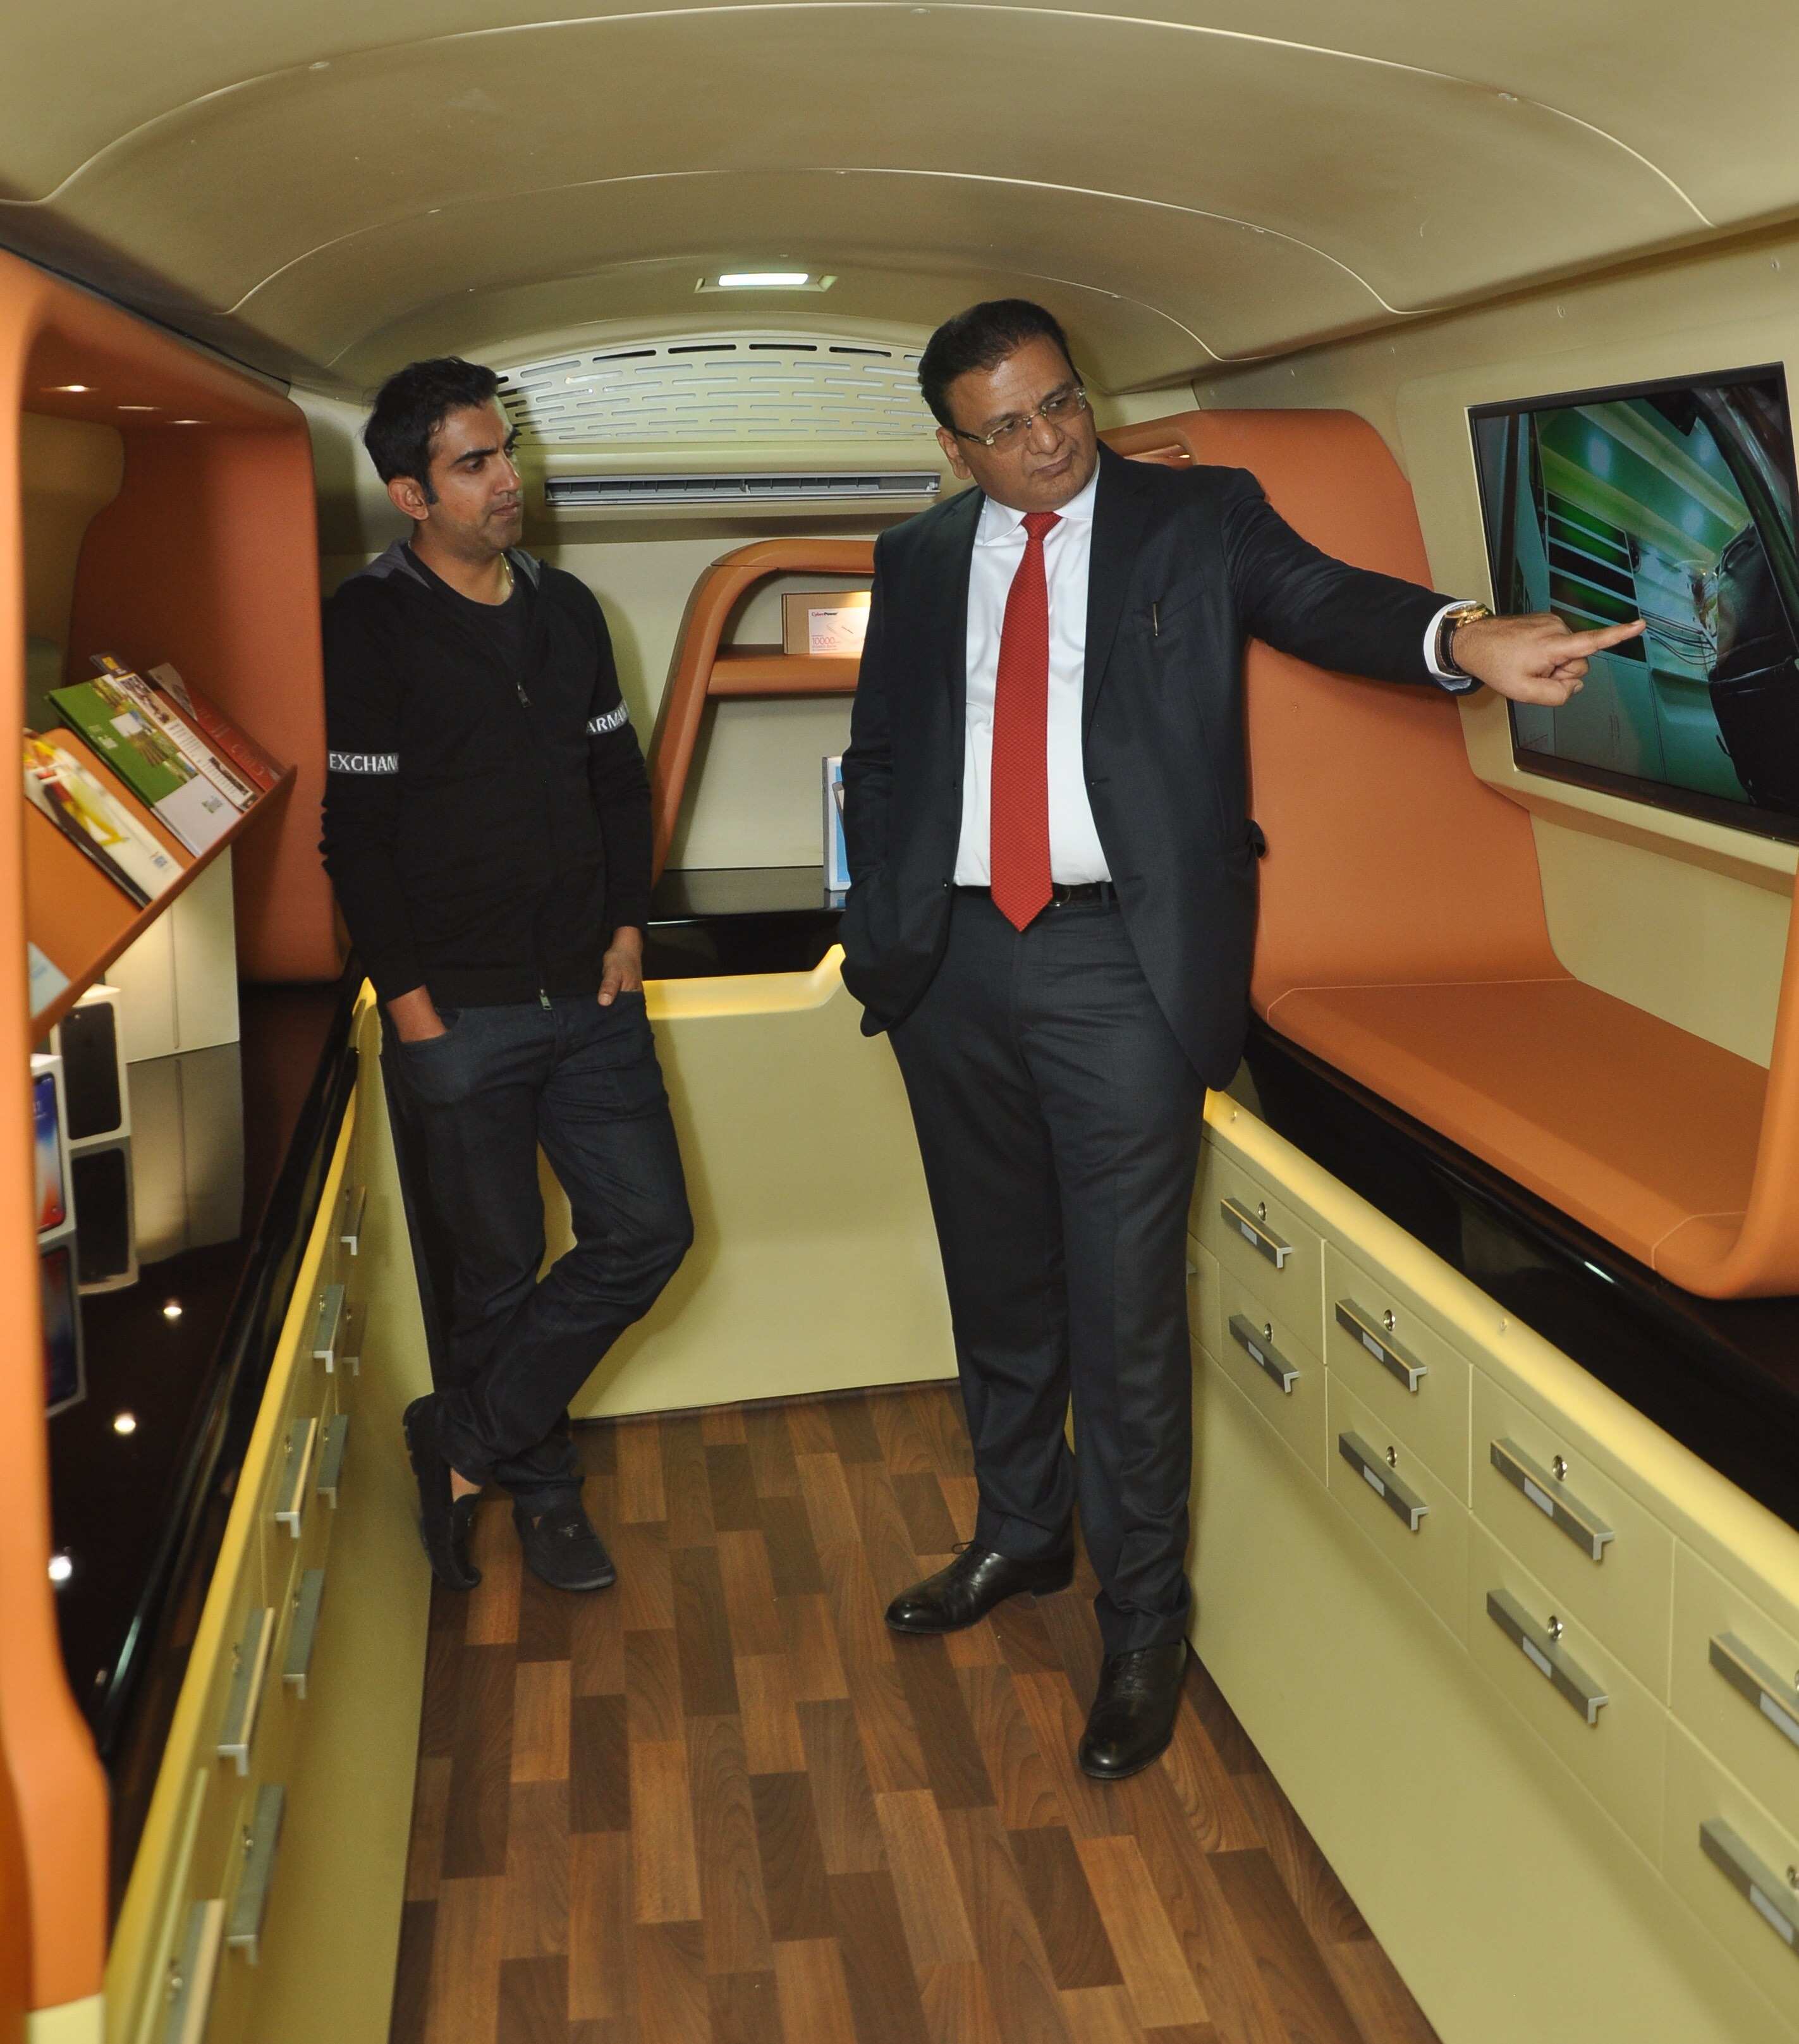 Auto Expo 2018: Want to travel in luxury? Buy this home on wheels!